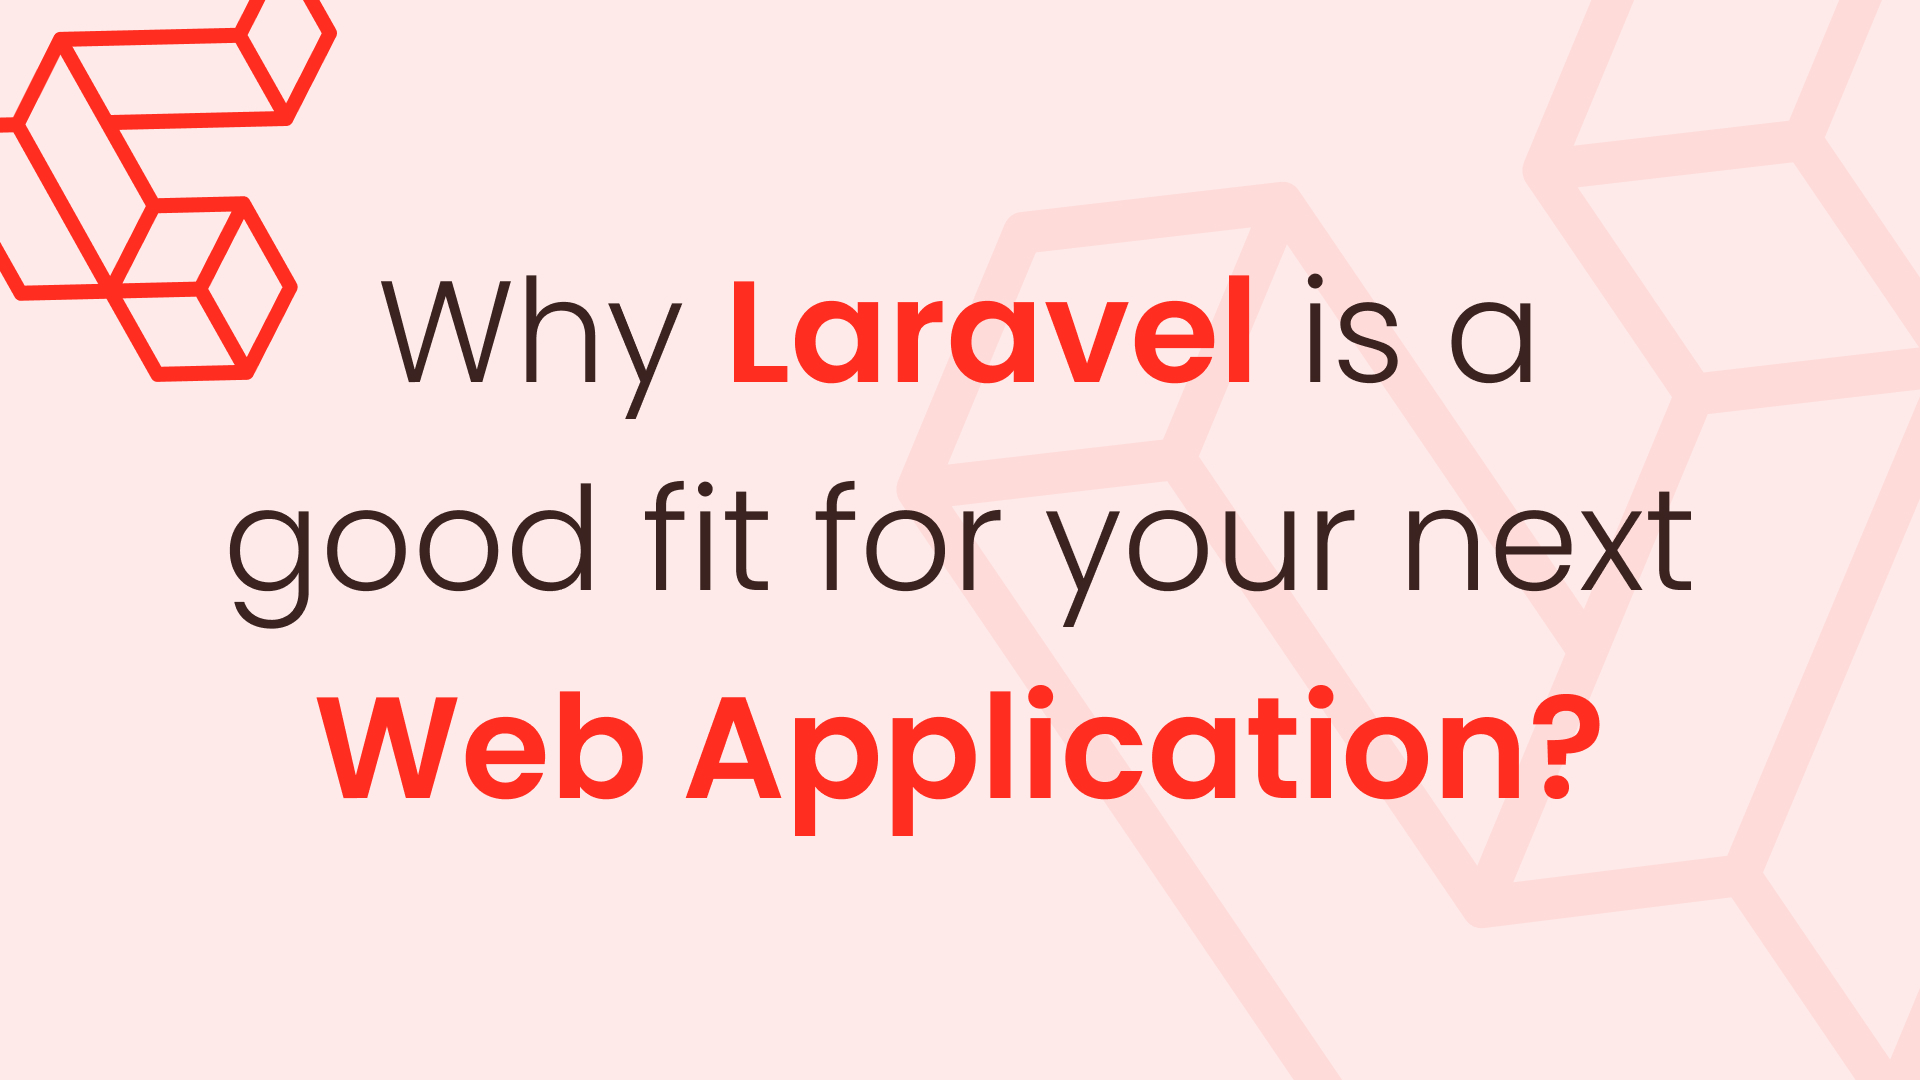 Why Laravel is a good fit for your next web application